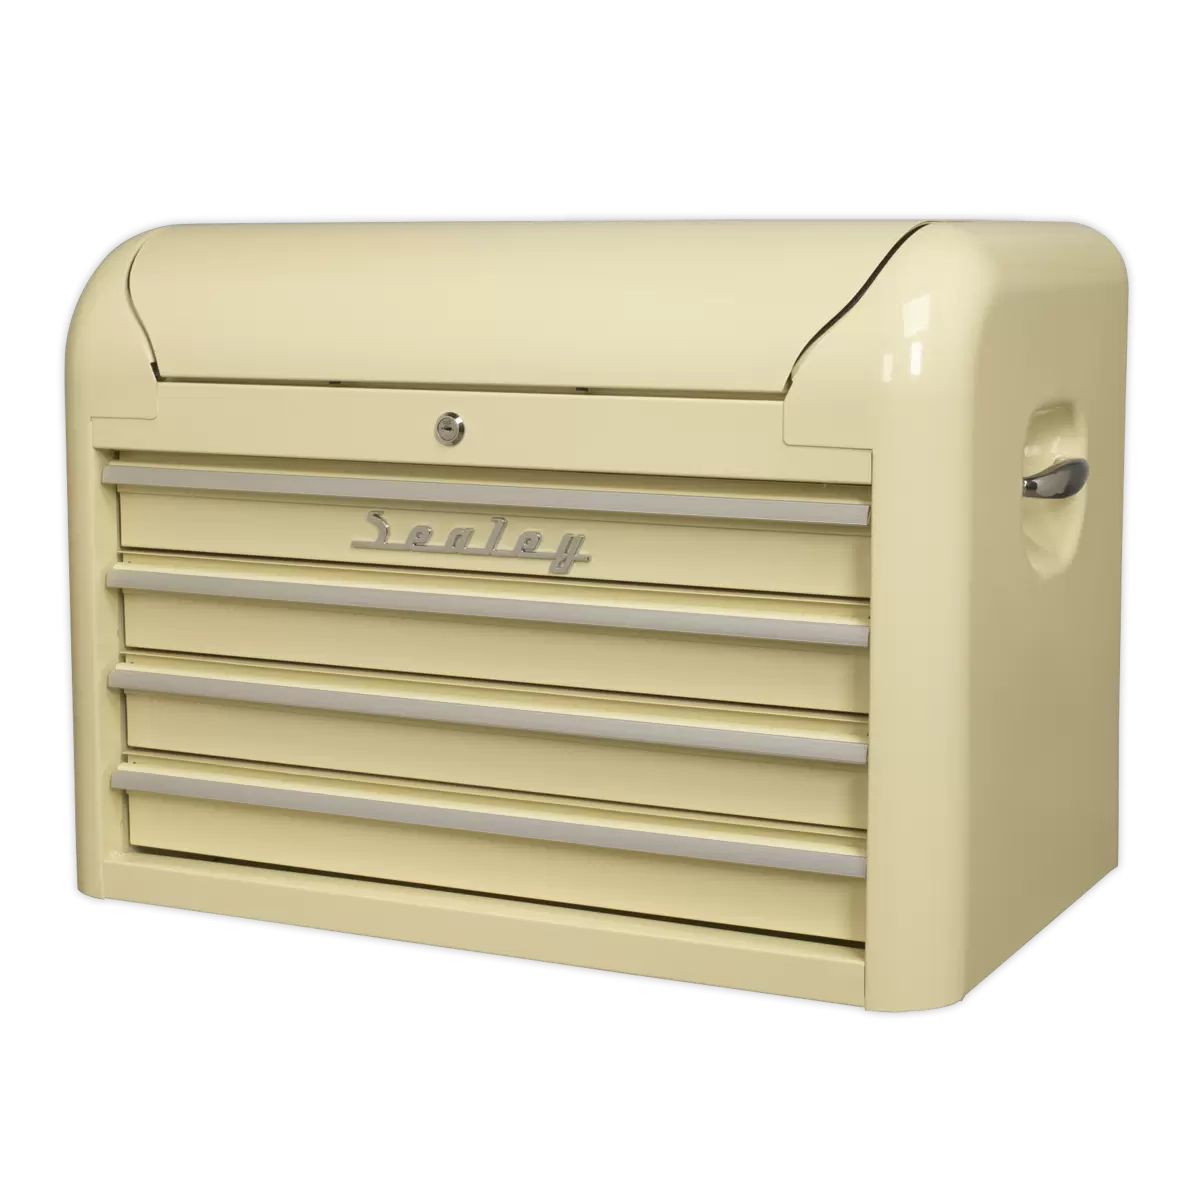 Sealey AP28104 Top chest 4 Drawer Retro